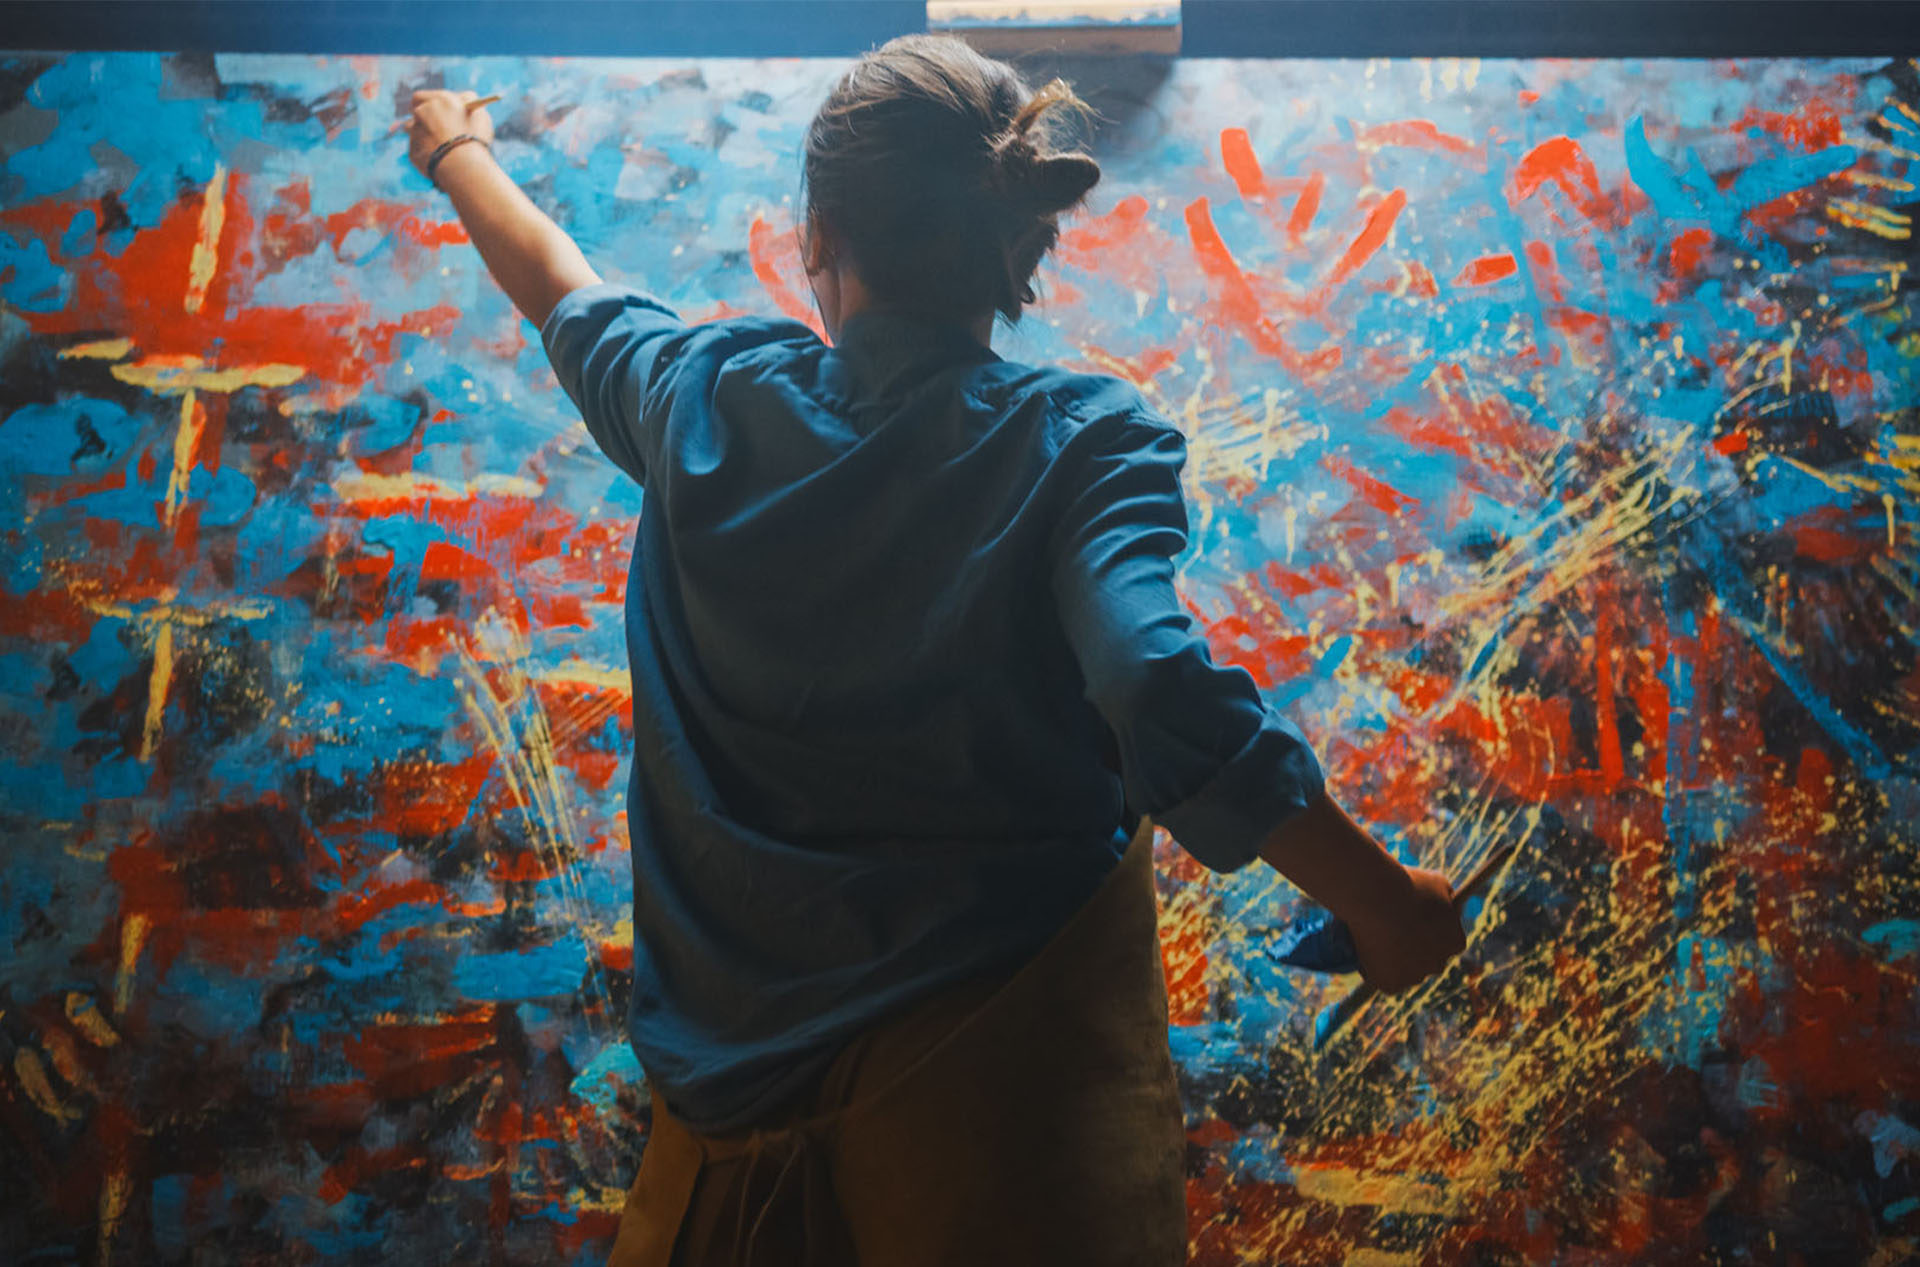 A woman in blue paints on a large canvas or panel.